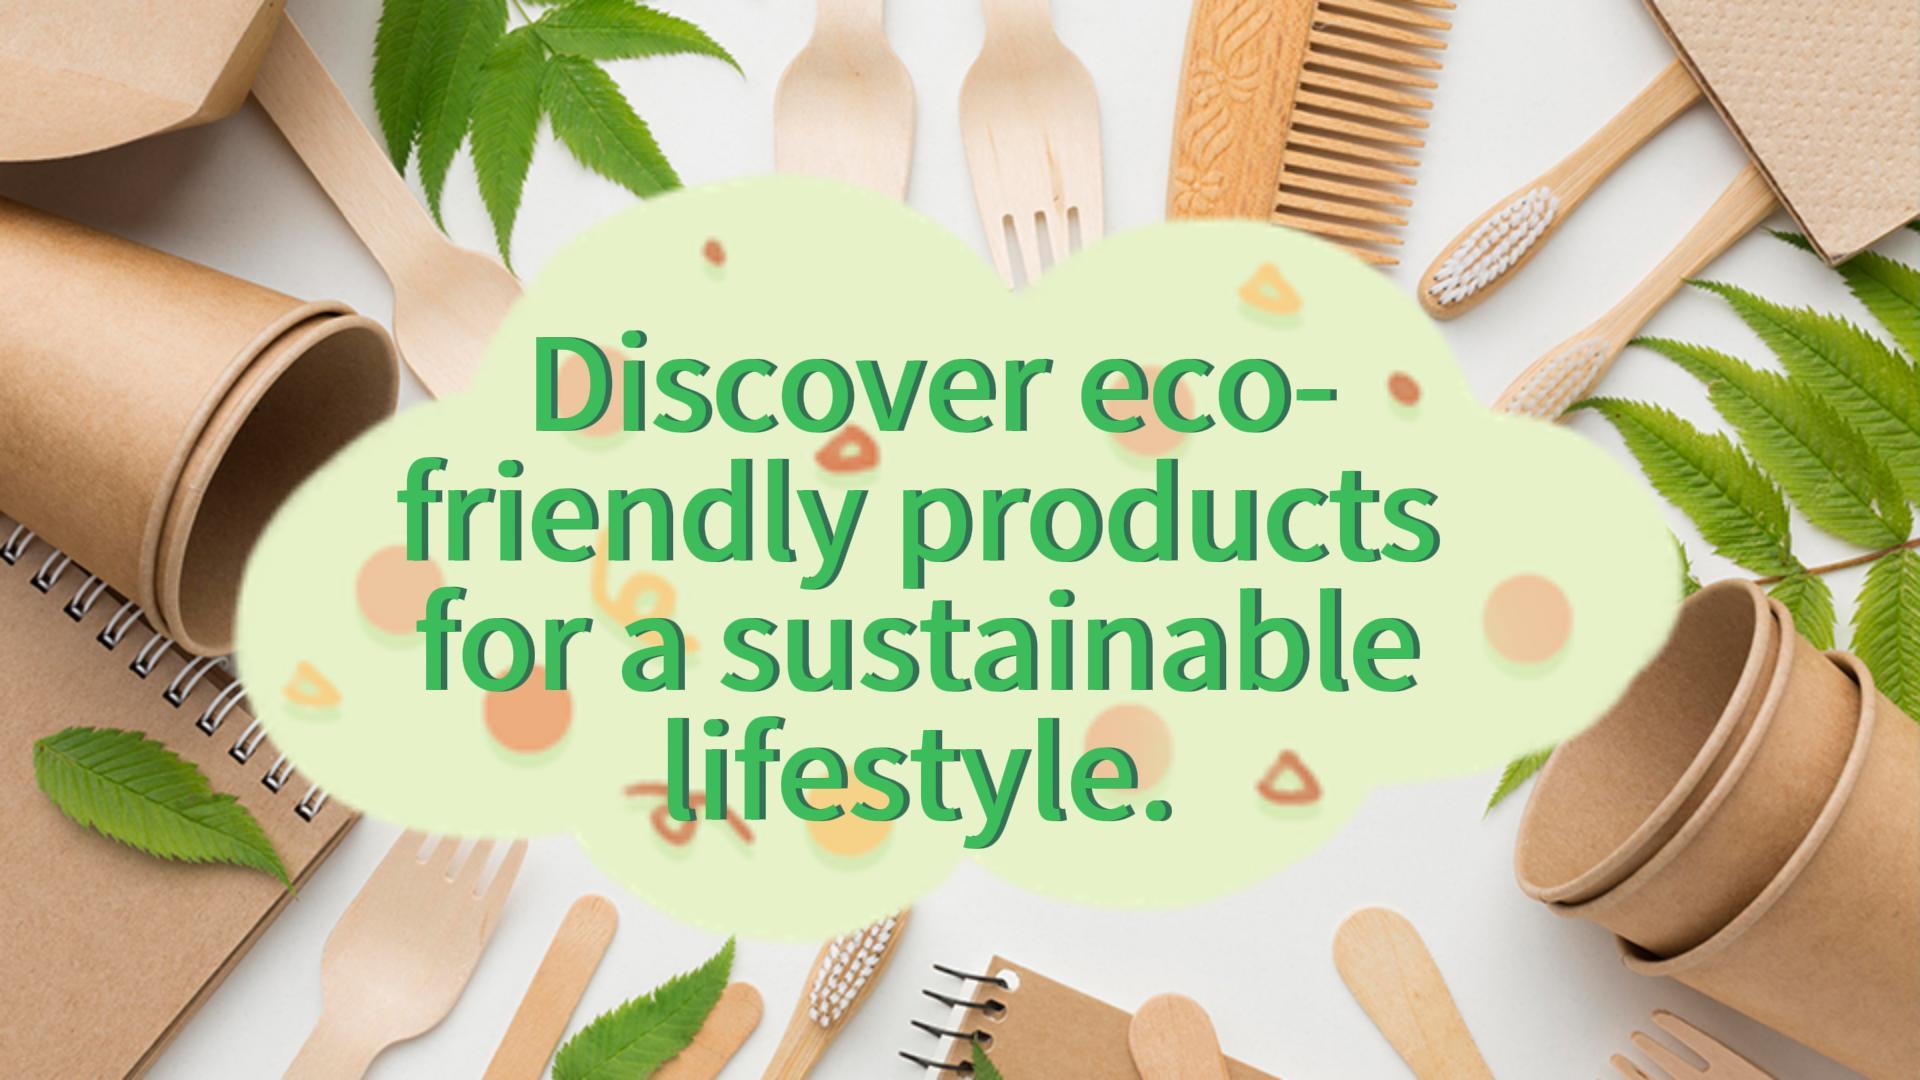 eco-friendly products for a sustainable lifestyle